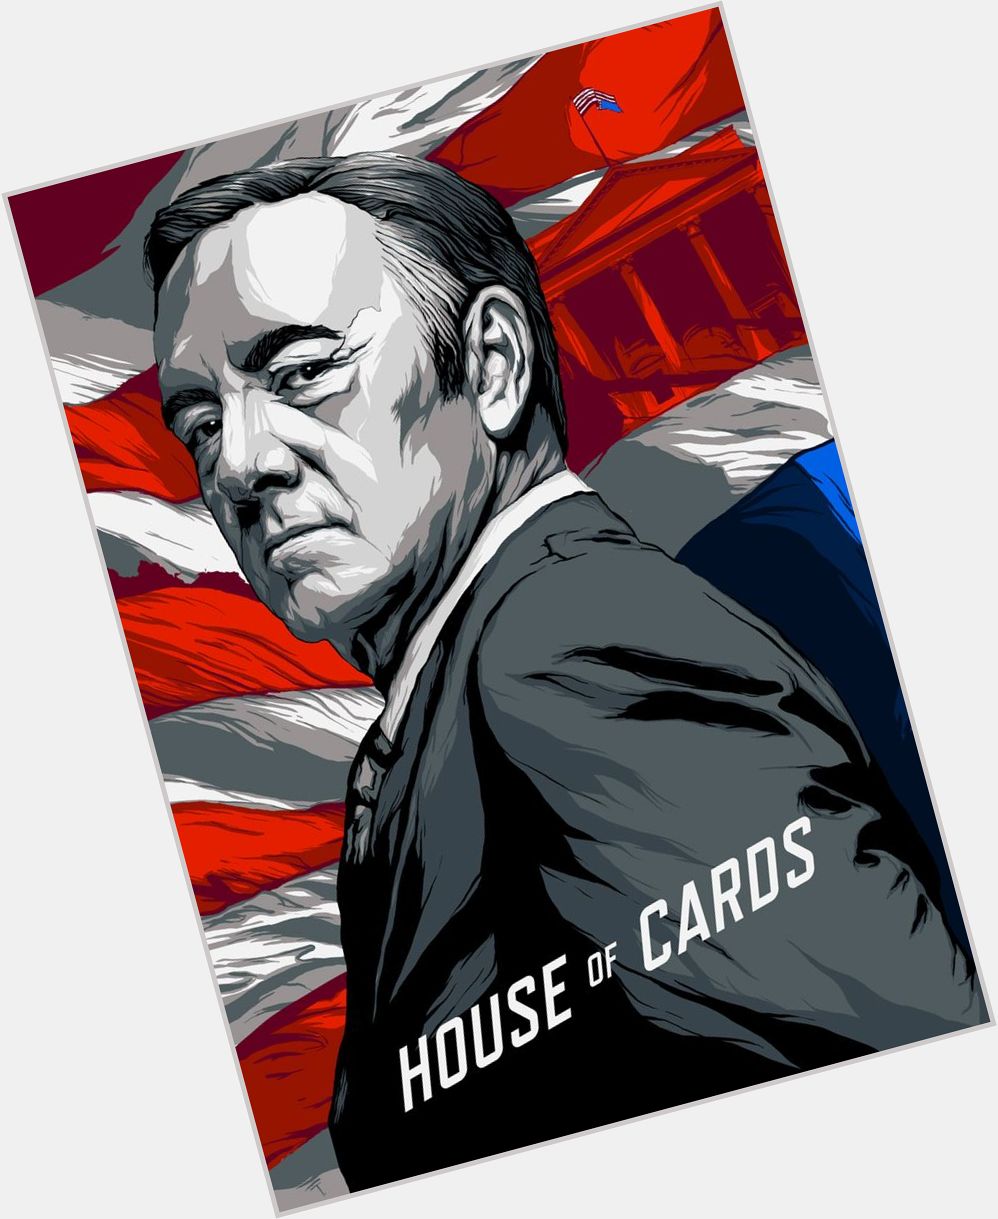 Happy Birthday to the great Kevin Spacey.  May Frank Underwood live long and prosper.  